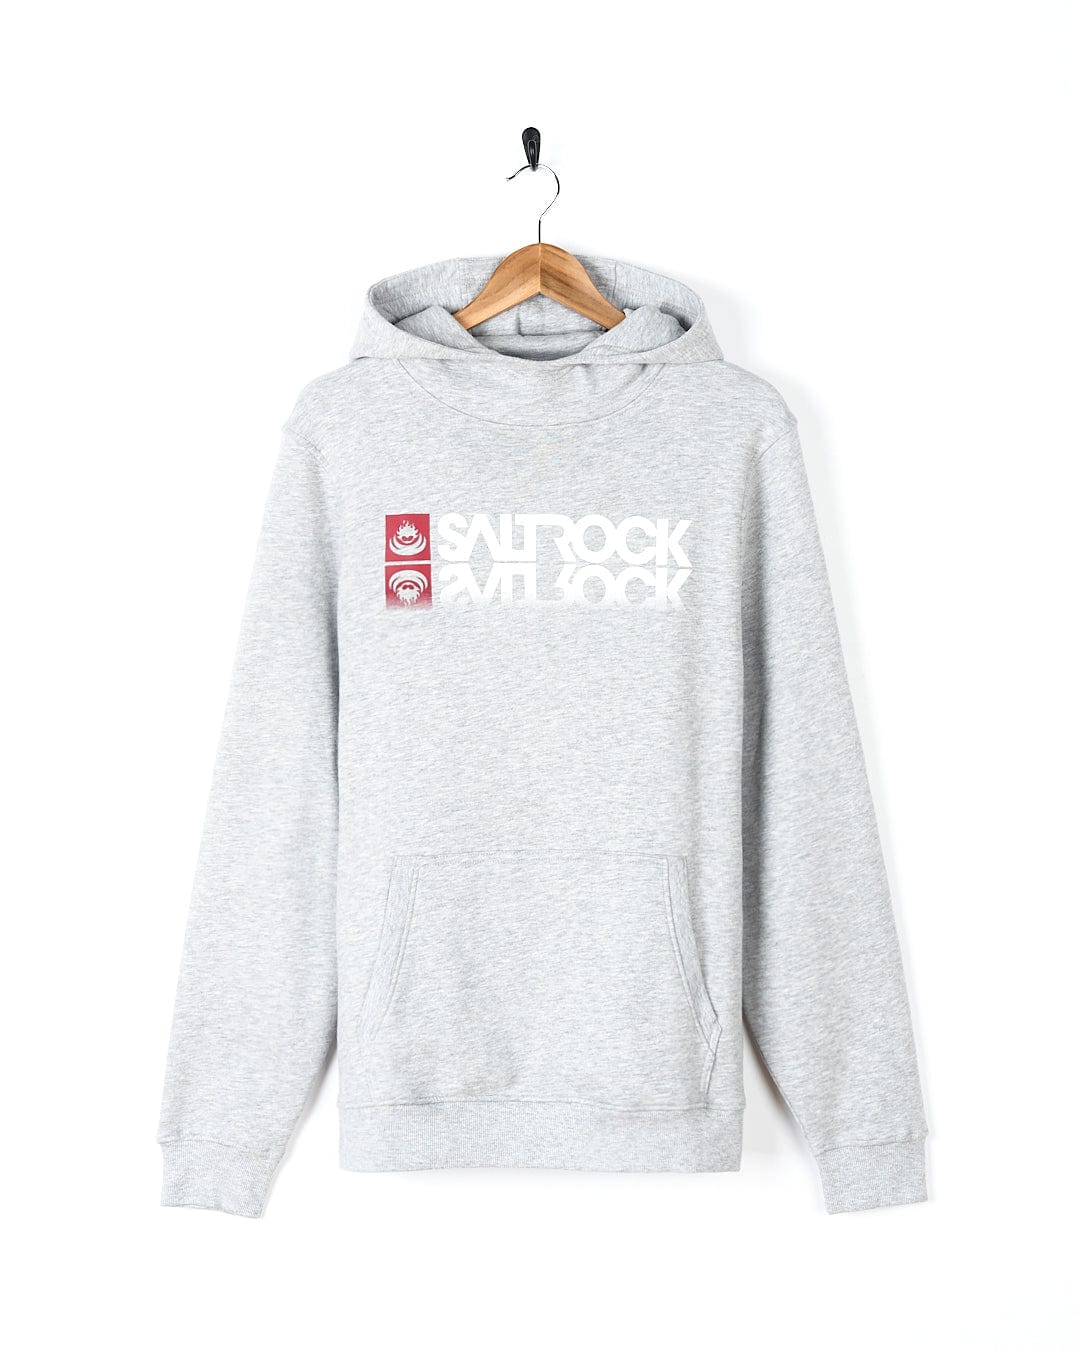 A Saltrock Reflect - Mens Pop Hoodie - Grey with a red logo on it.